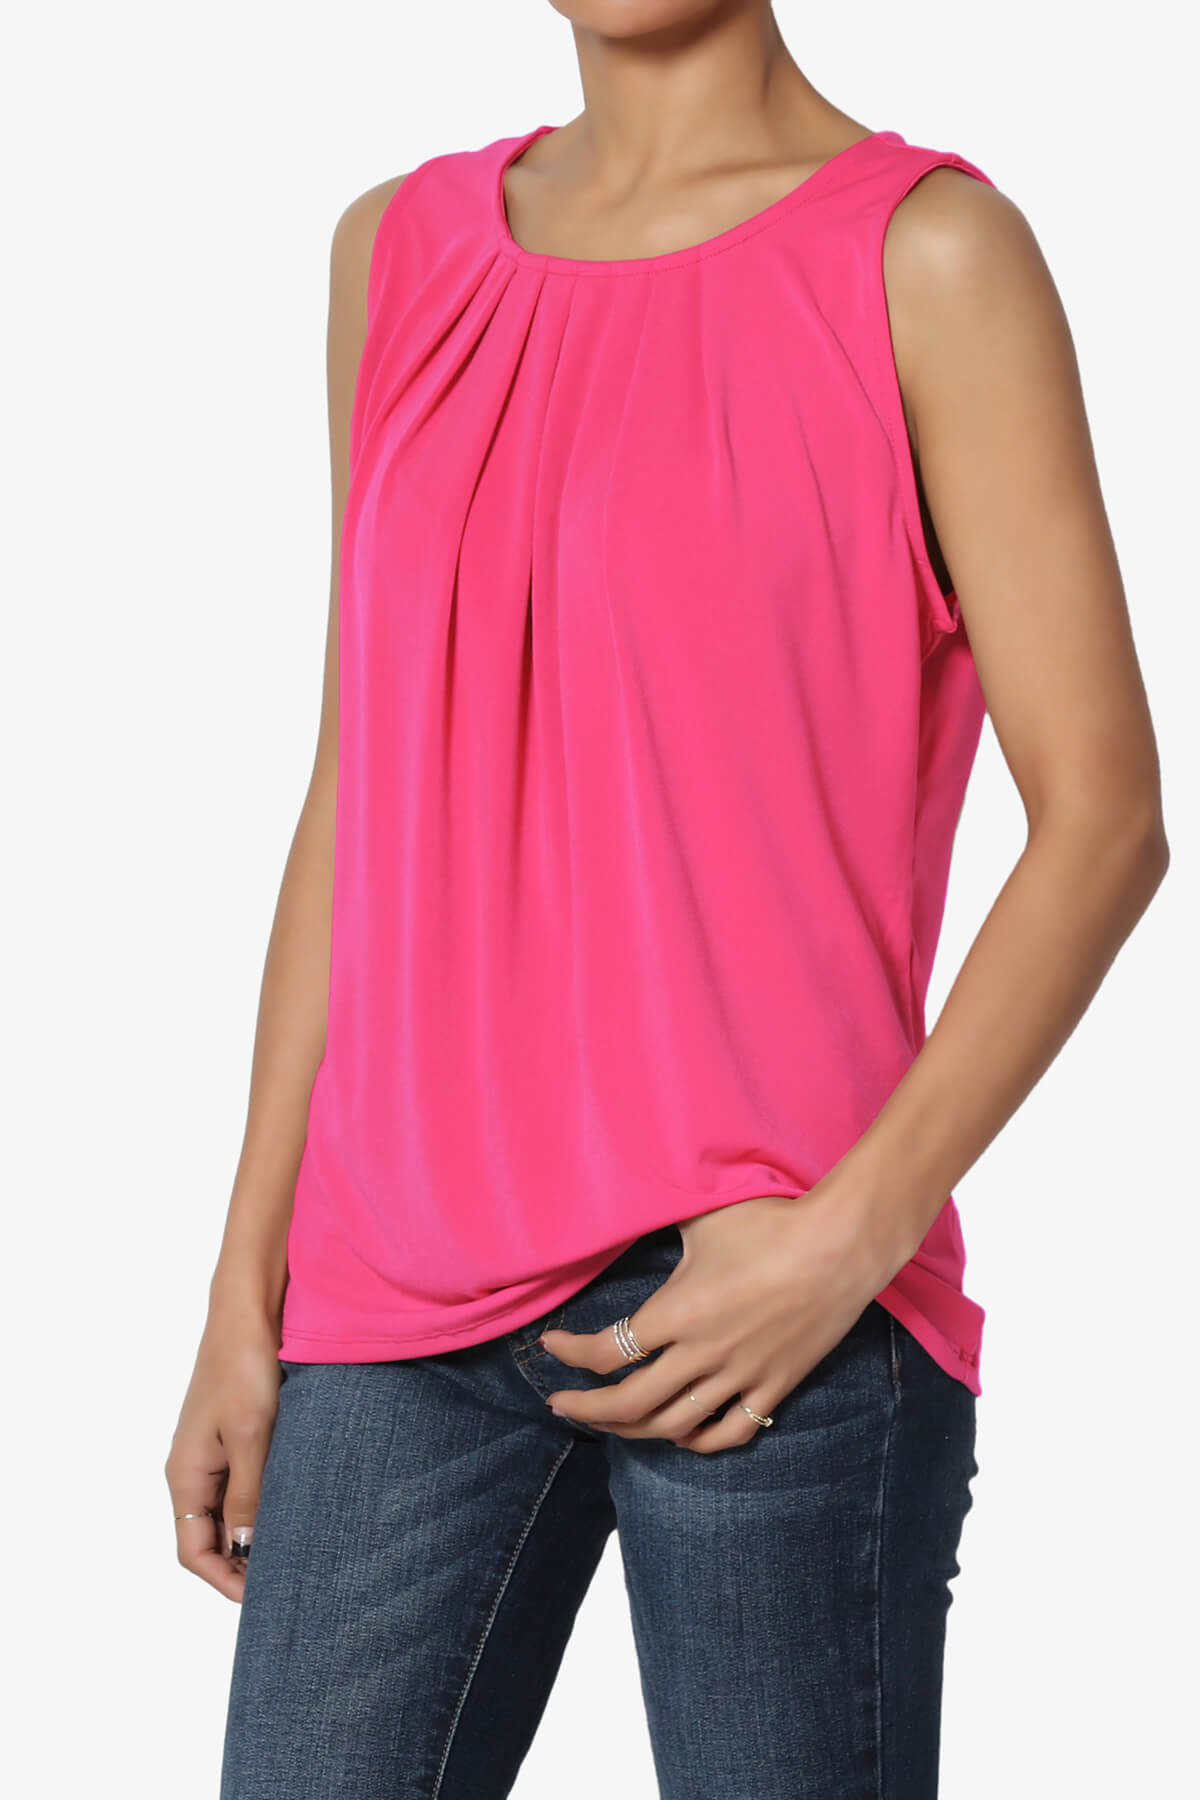 Chaffee Pleat Neck Tank Top HOT PINK_3